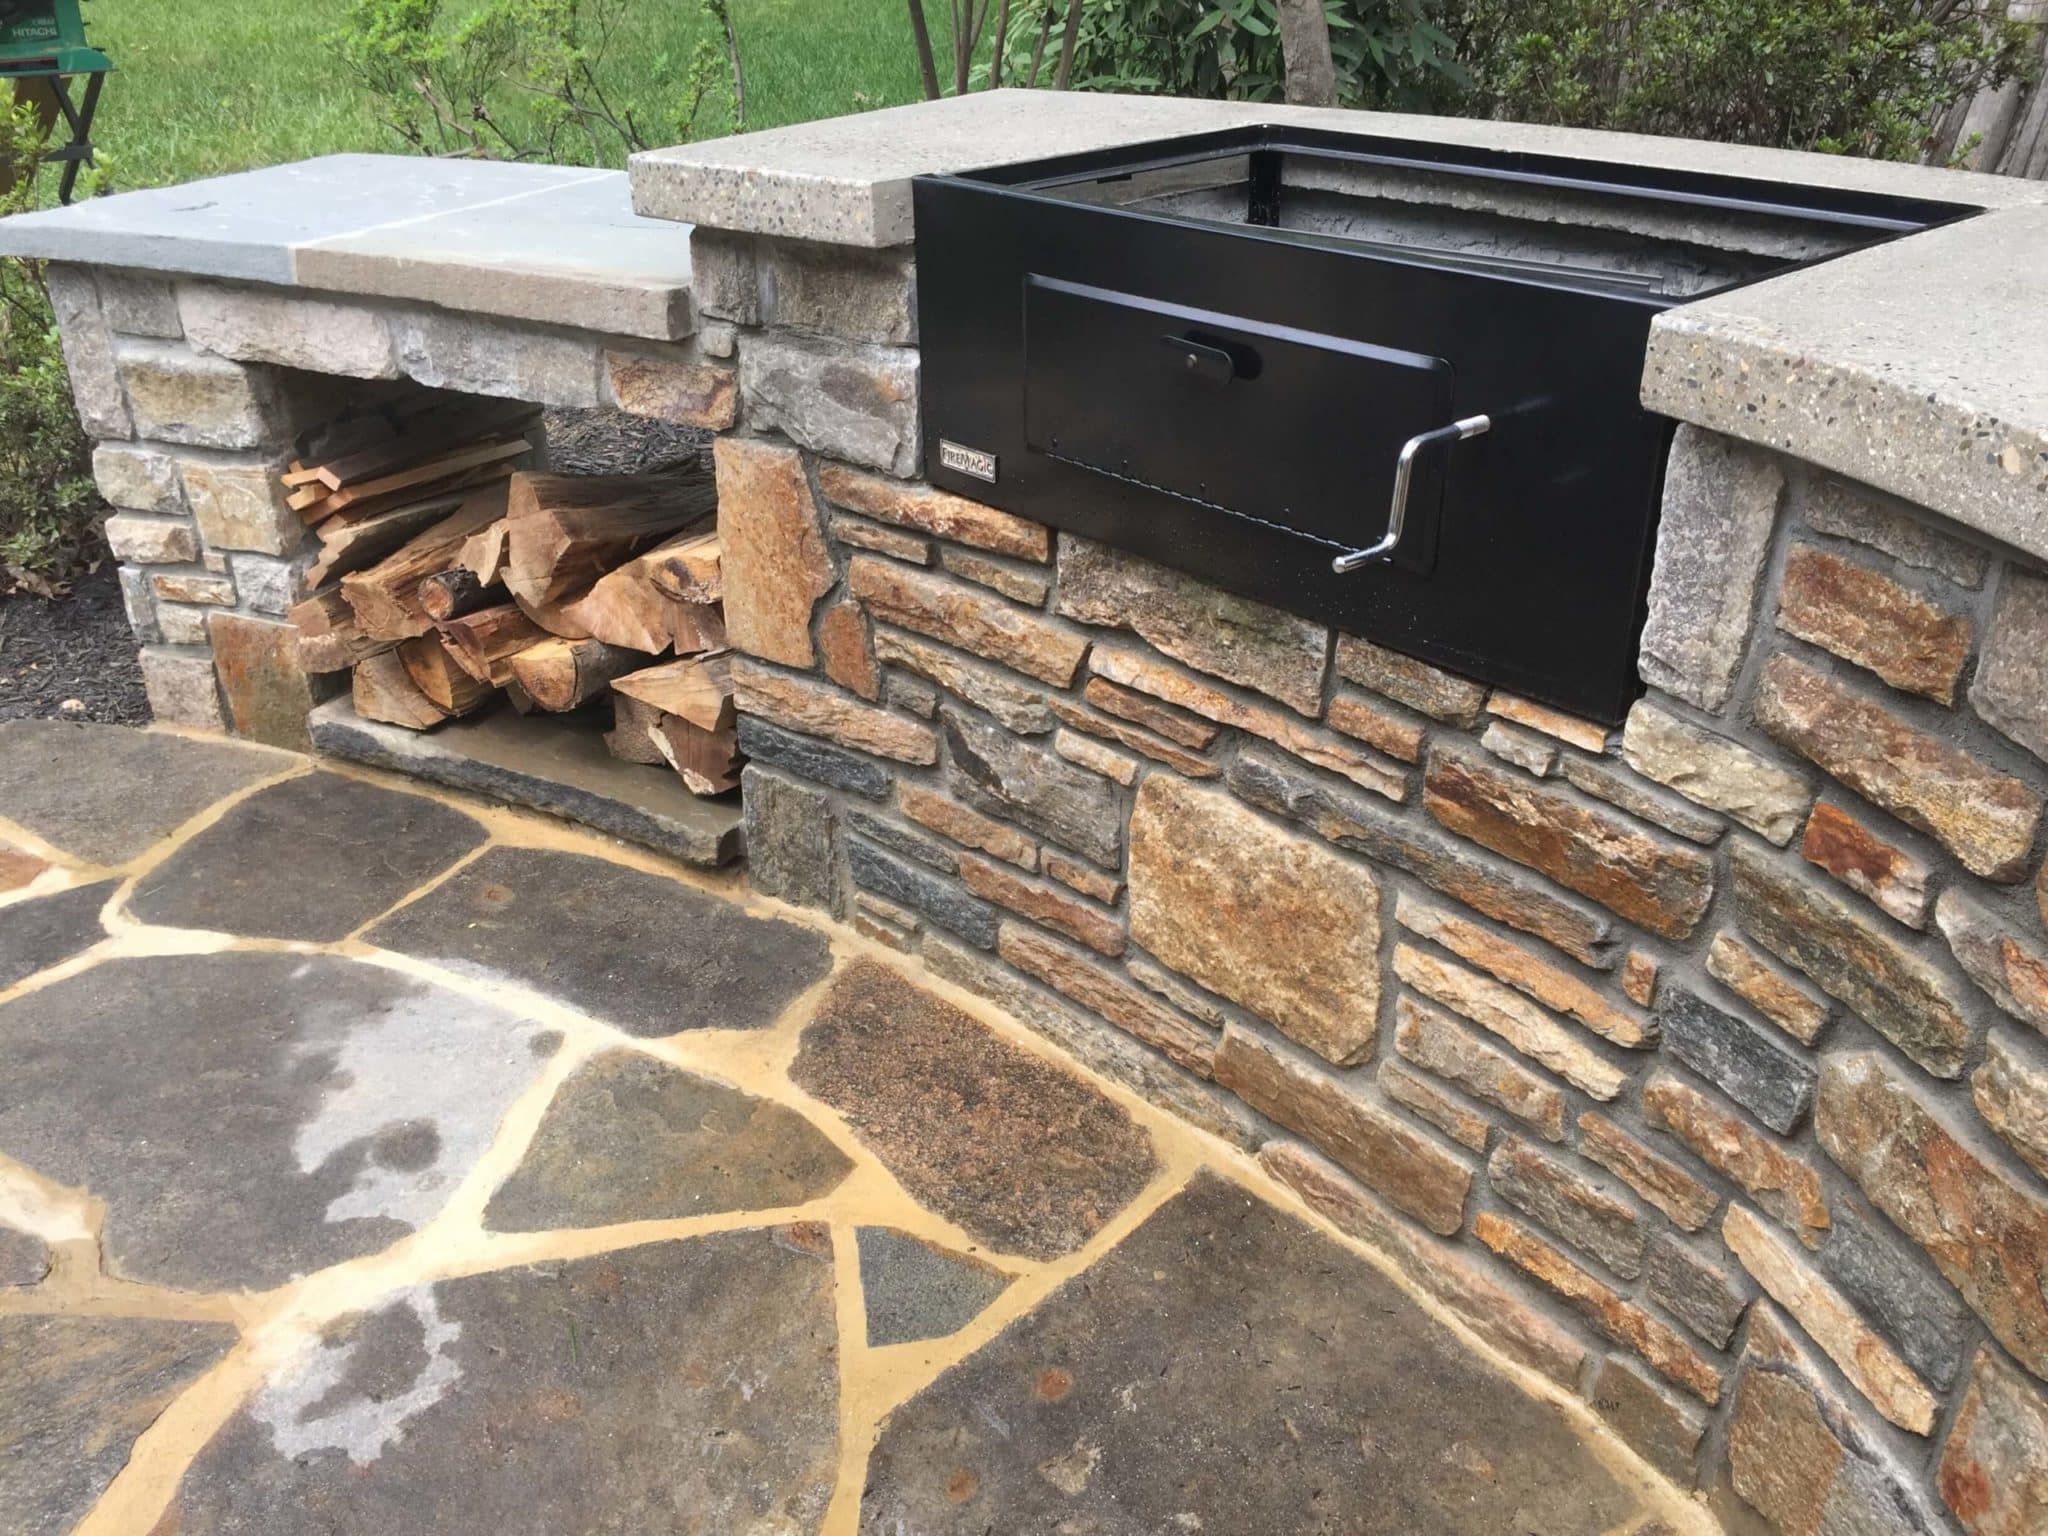 529 Built In Charcoal Barbecue with Baltimore Wall Stone and Concrete Countertop